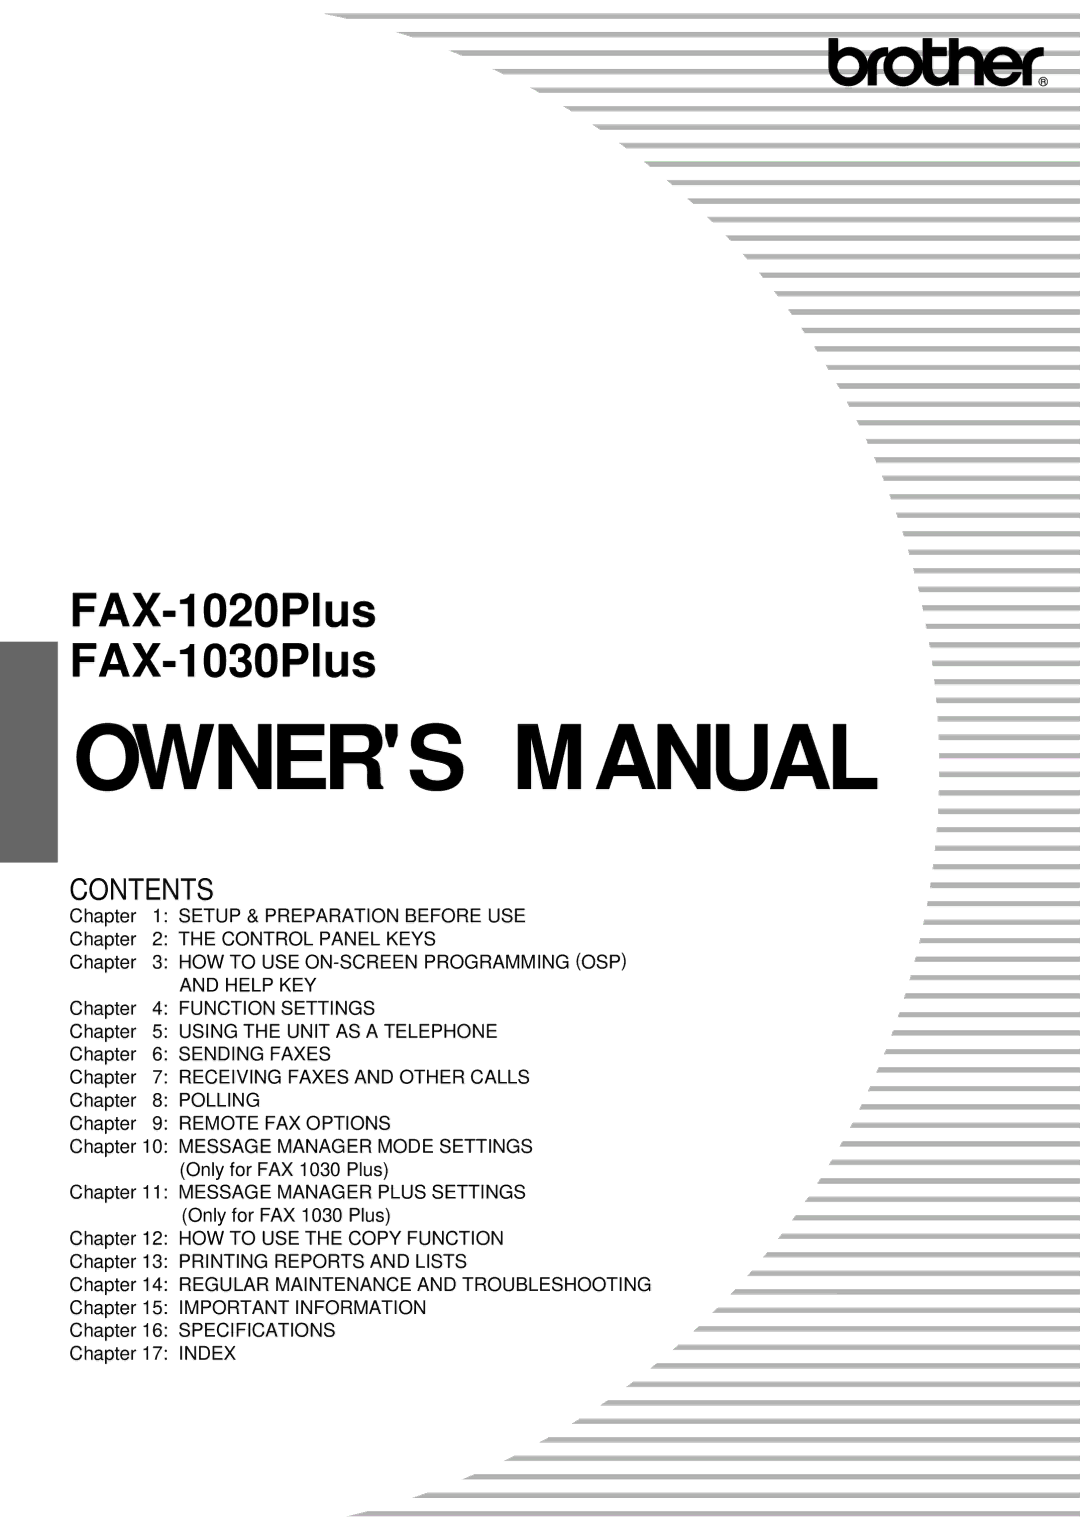 Brother Fax-1020Plus owner manual FAX-1020Plus FAX-1030Plus 